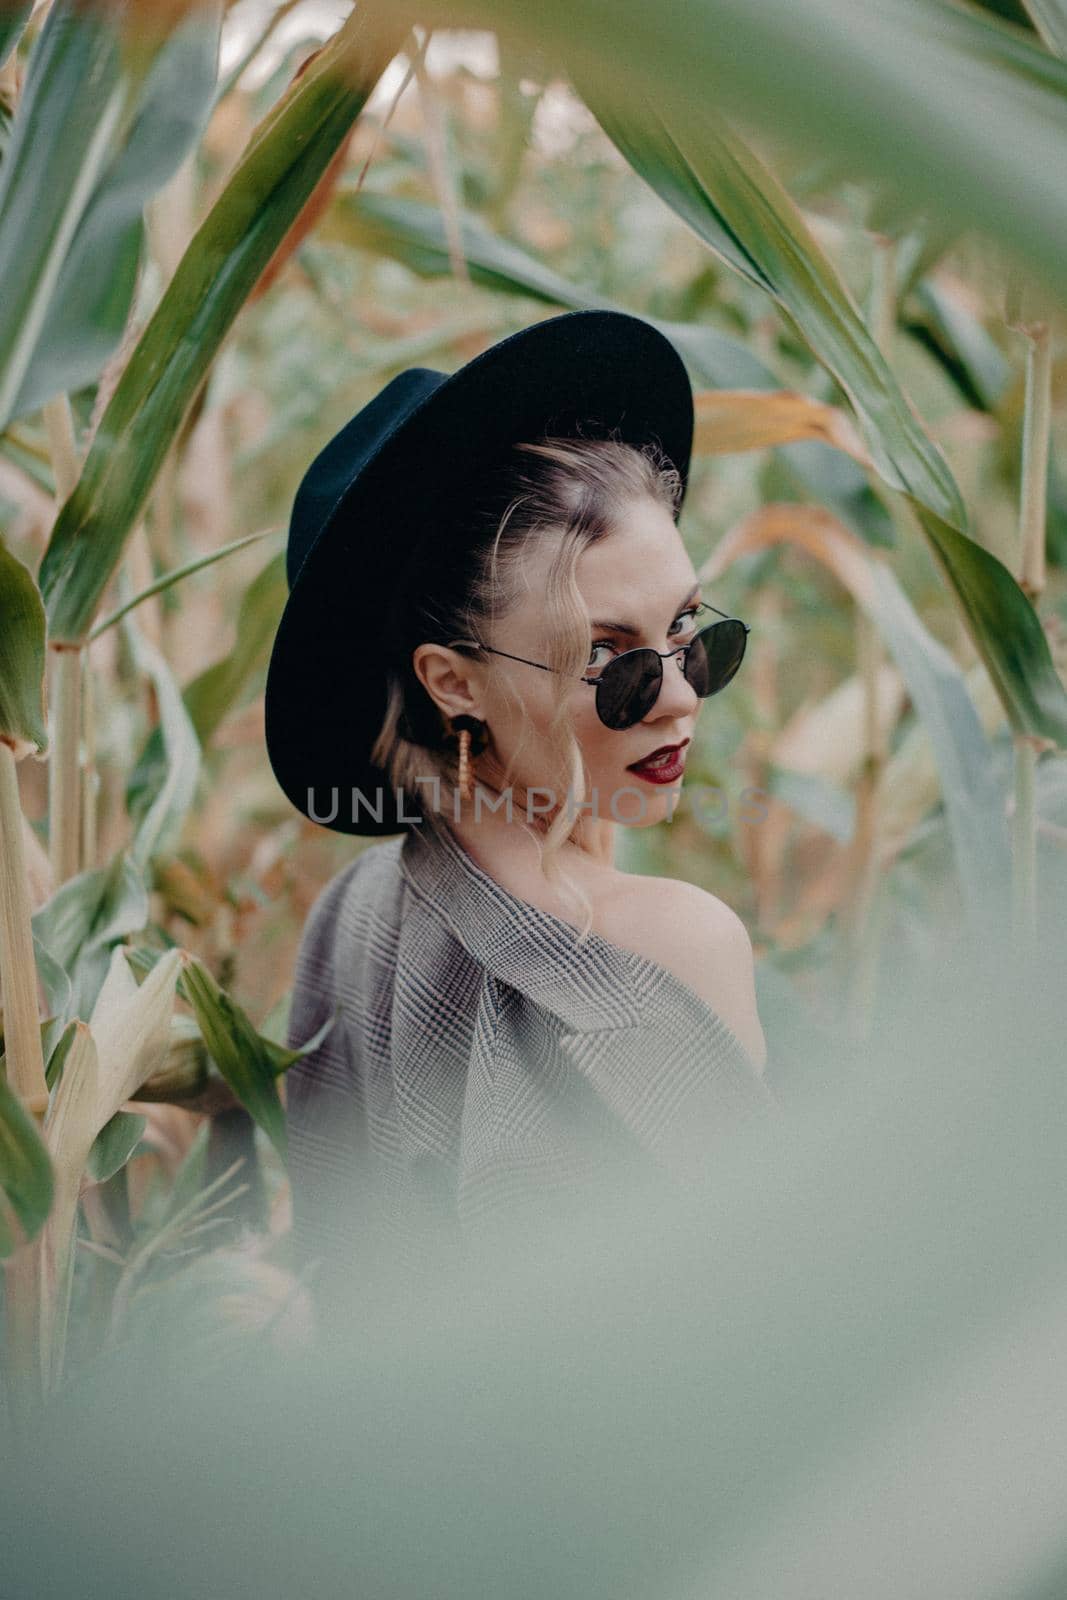 Trendy woman in plaid blazer and hipster hat at corn background. Fashion girl portrait with black sunglasses posing on natural landscape. High quality photo